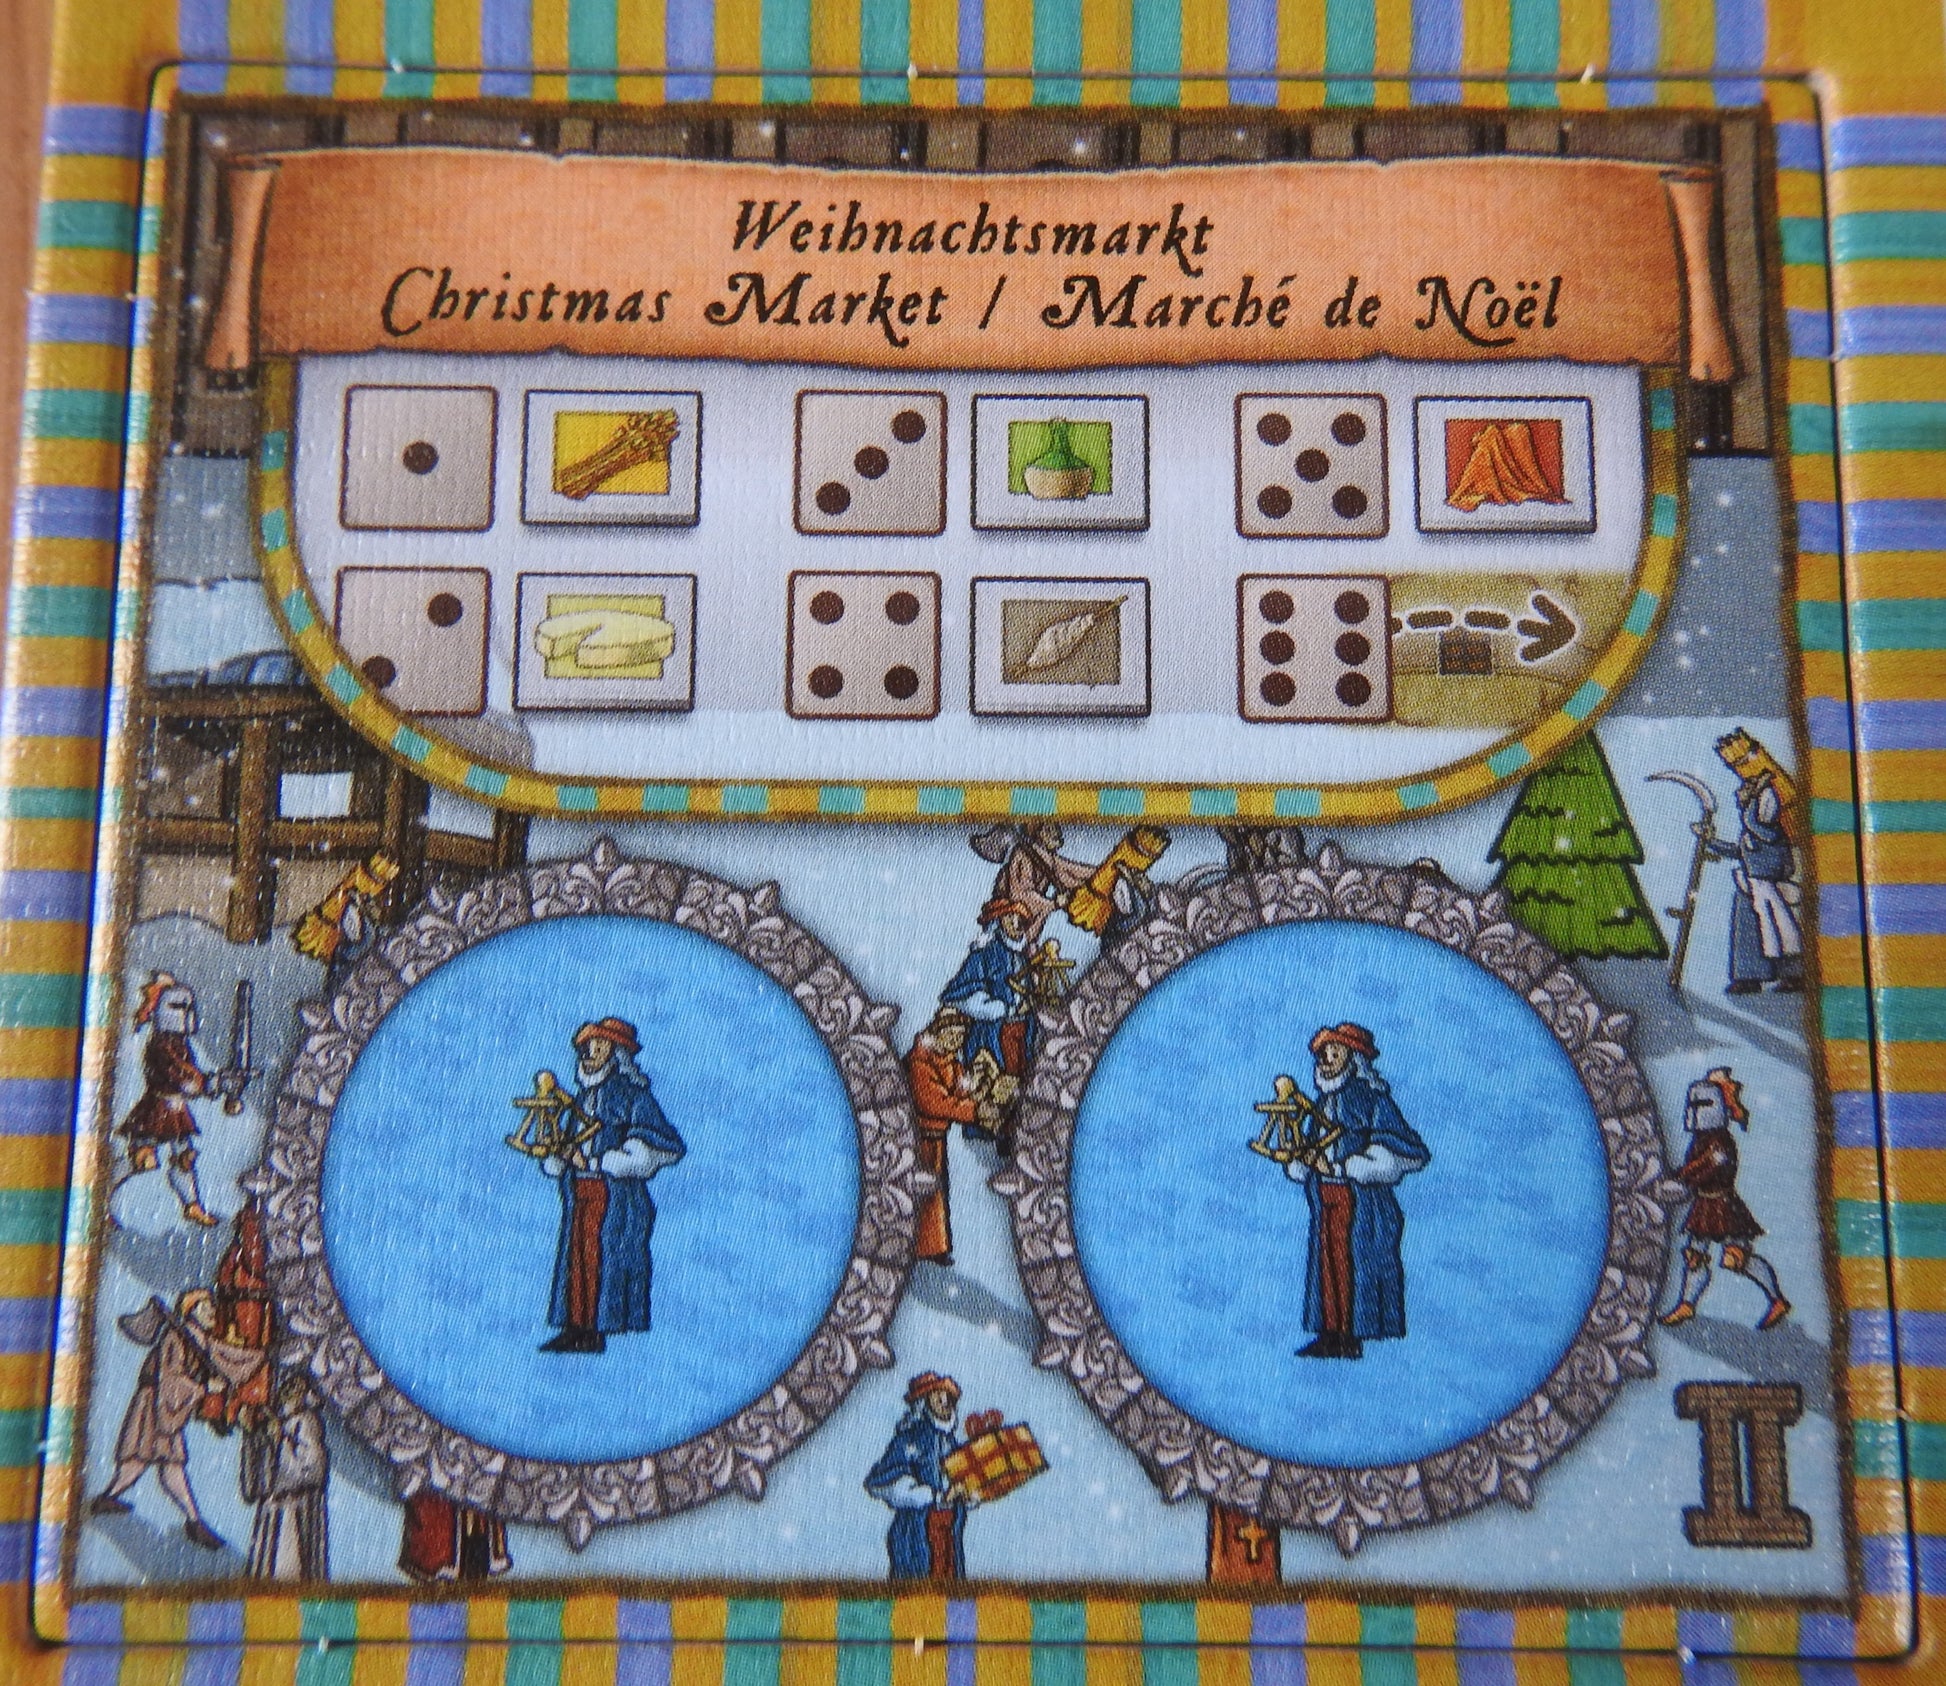 Close-up view of the Christmas Market promo place tile.